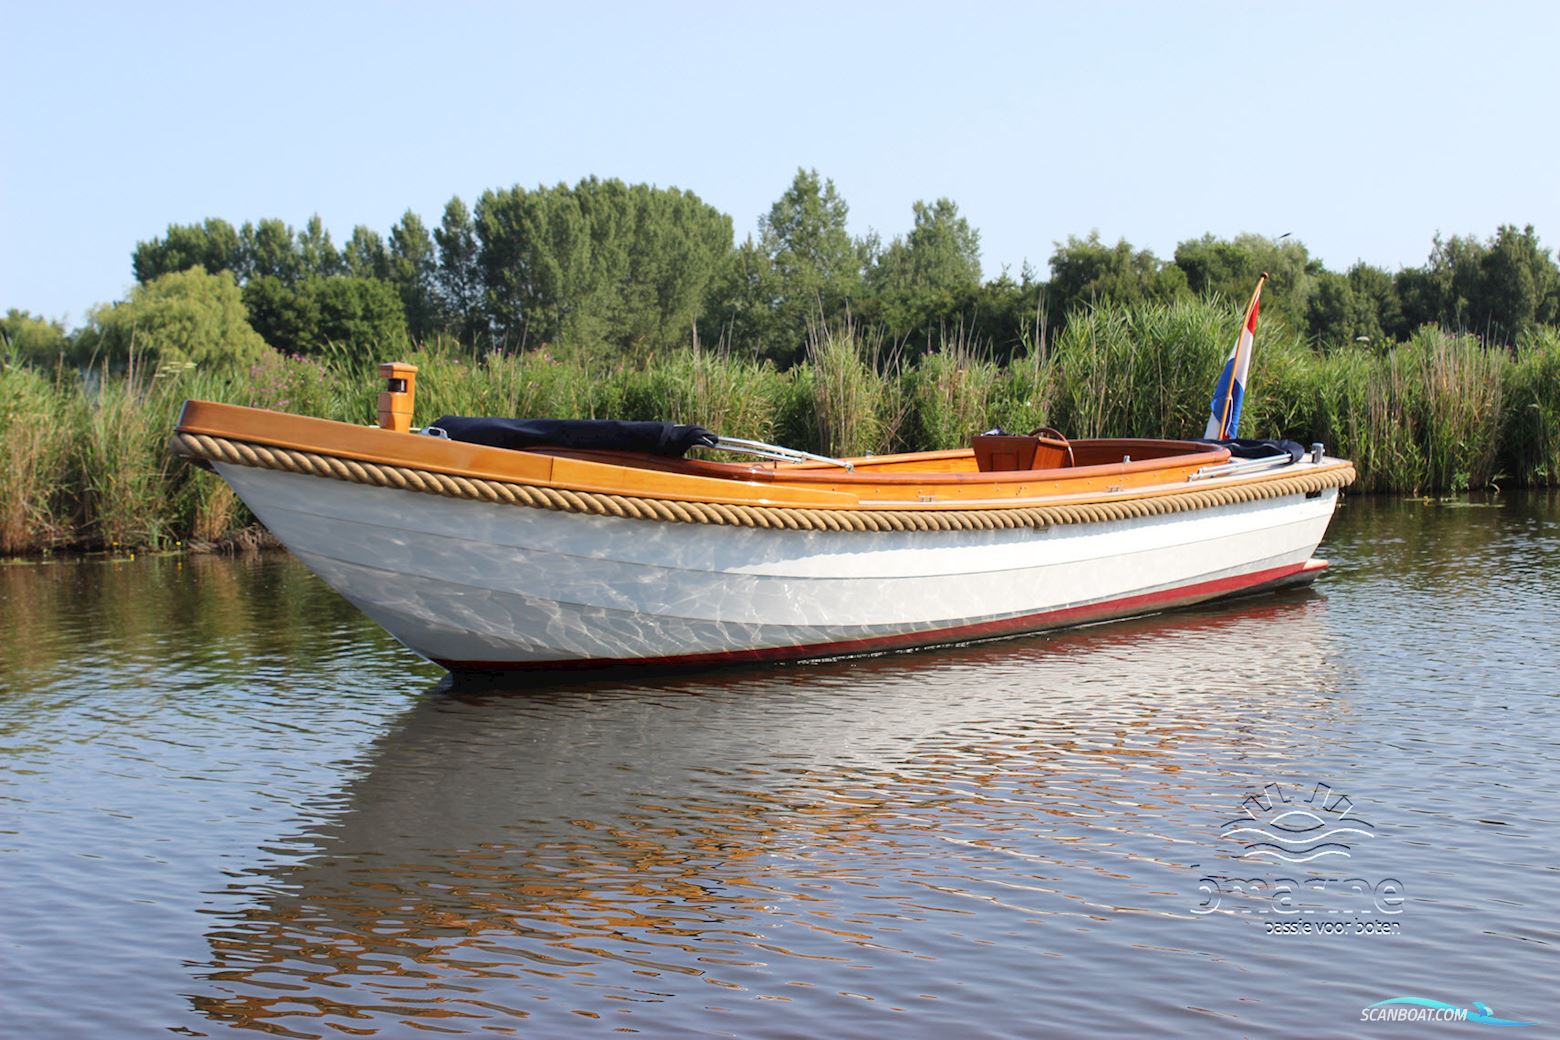 Roosemalen Vlet 770 Motor boat 2008, with Lombardini engine, The Netherlands